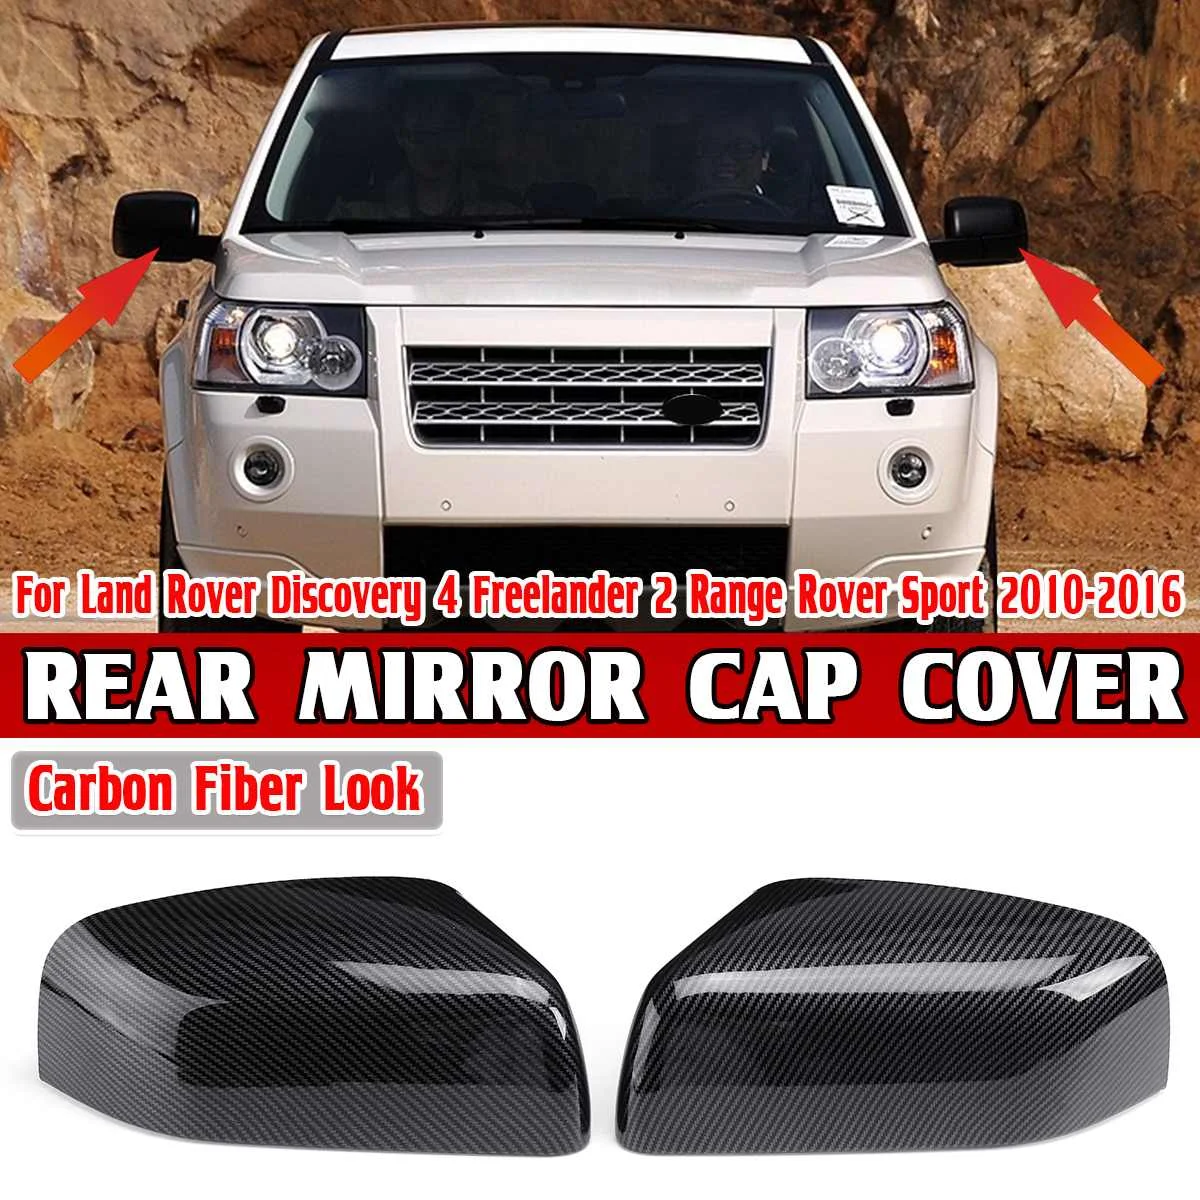 

Carbon Fiber Look 2xCar Side Rear View Mirror Cover Cap For Land Rover For Discovery 4 Freelander 2 Range Rover Sport 2010-2016